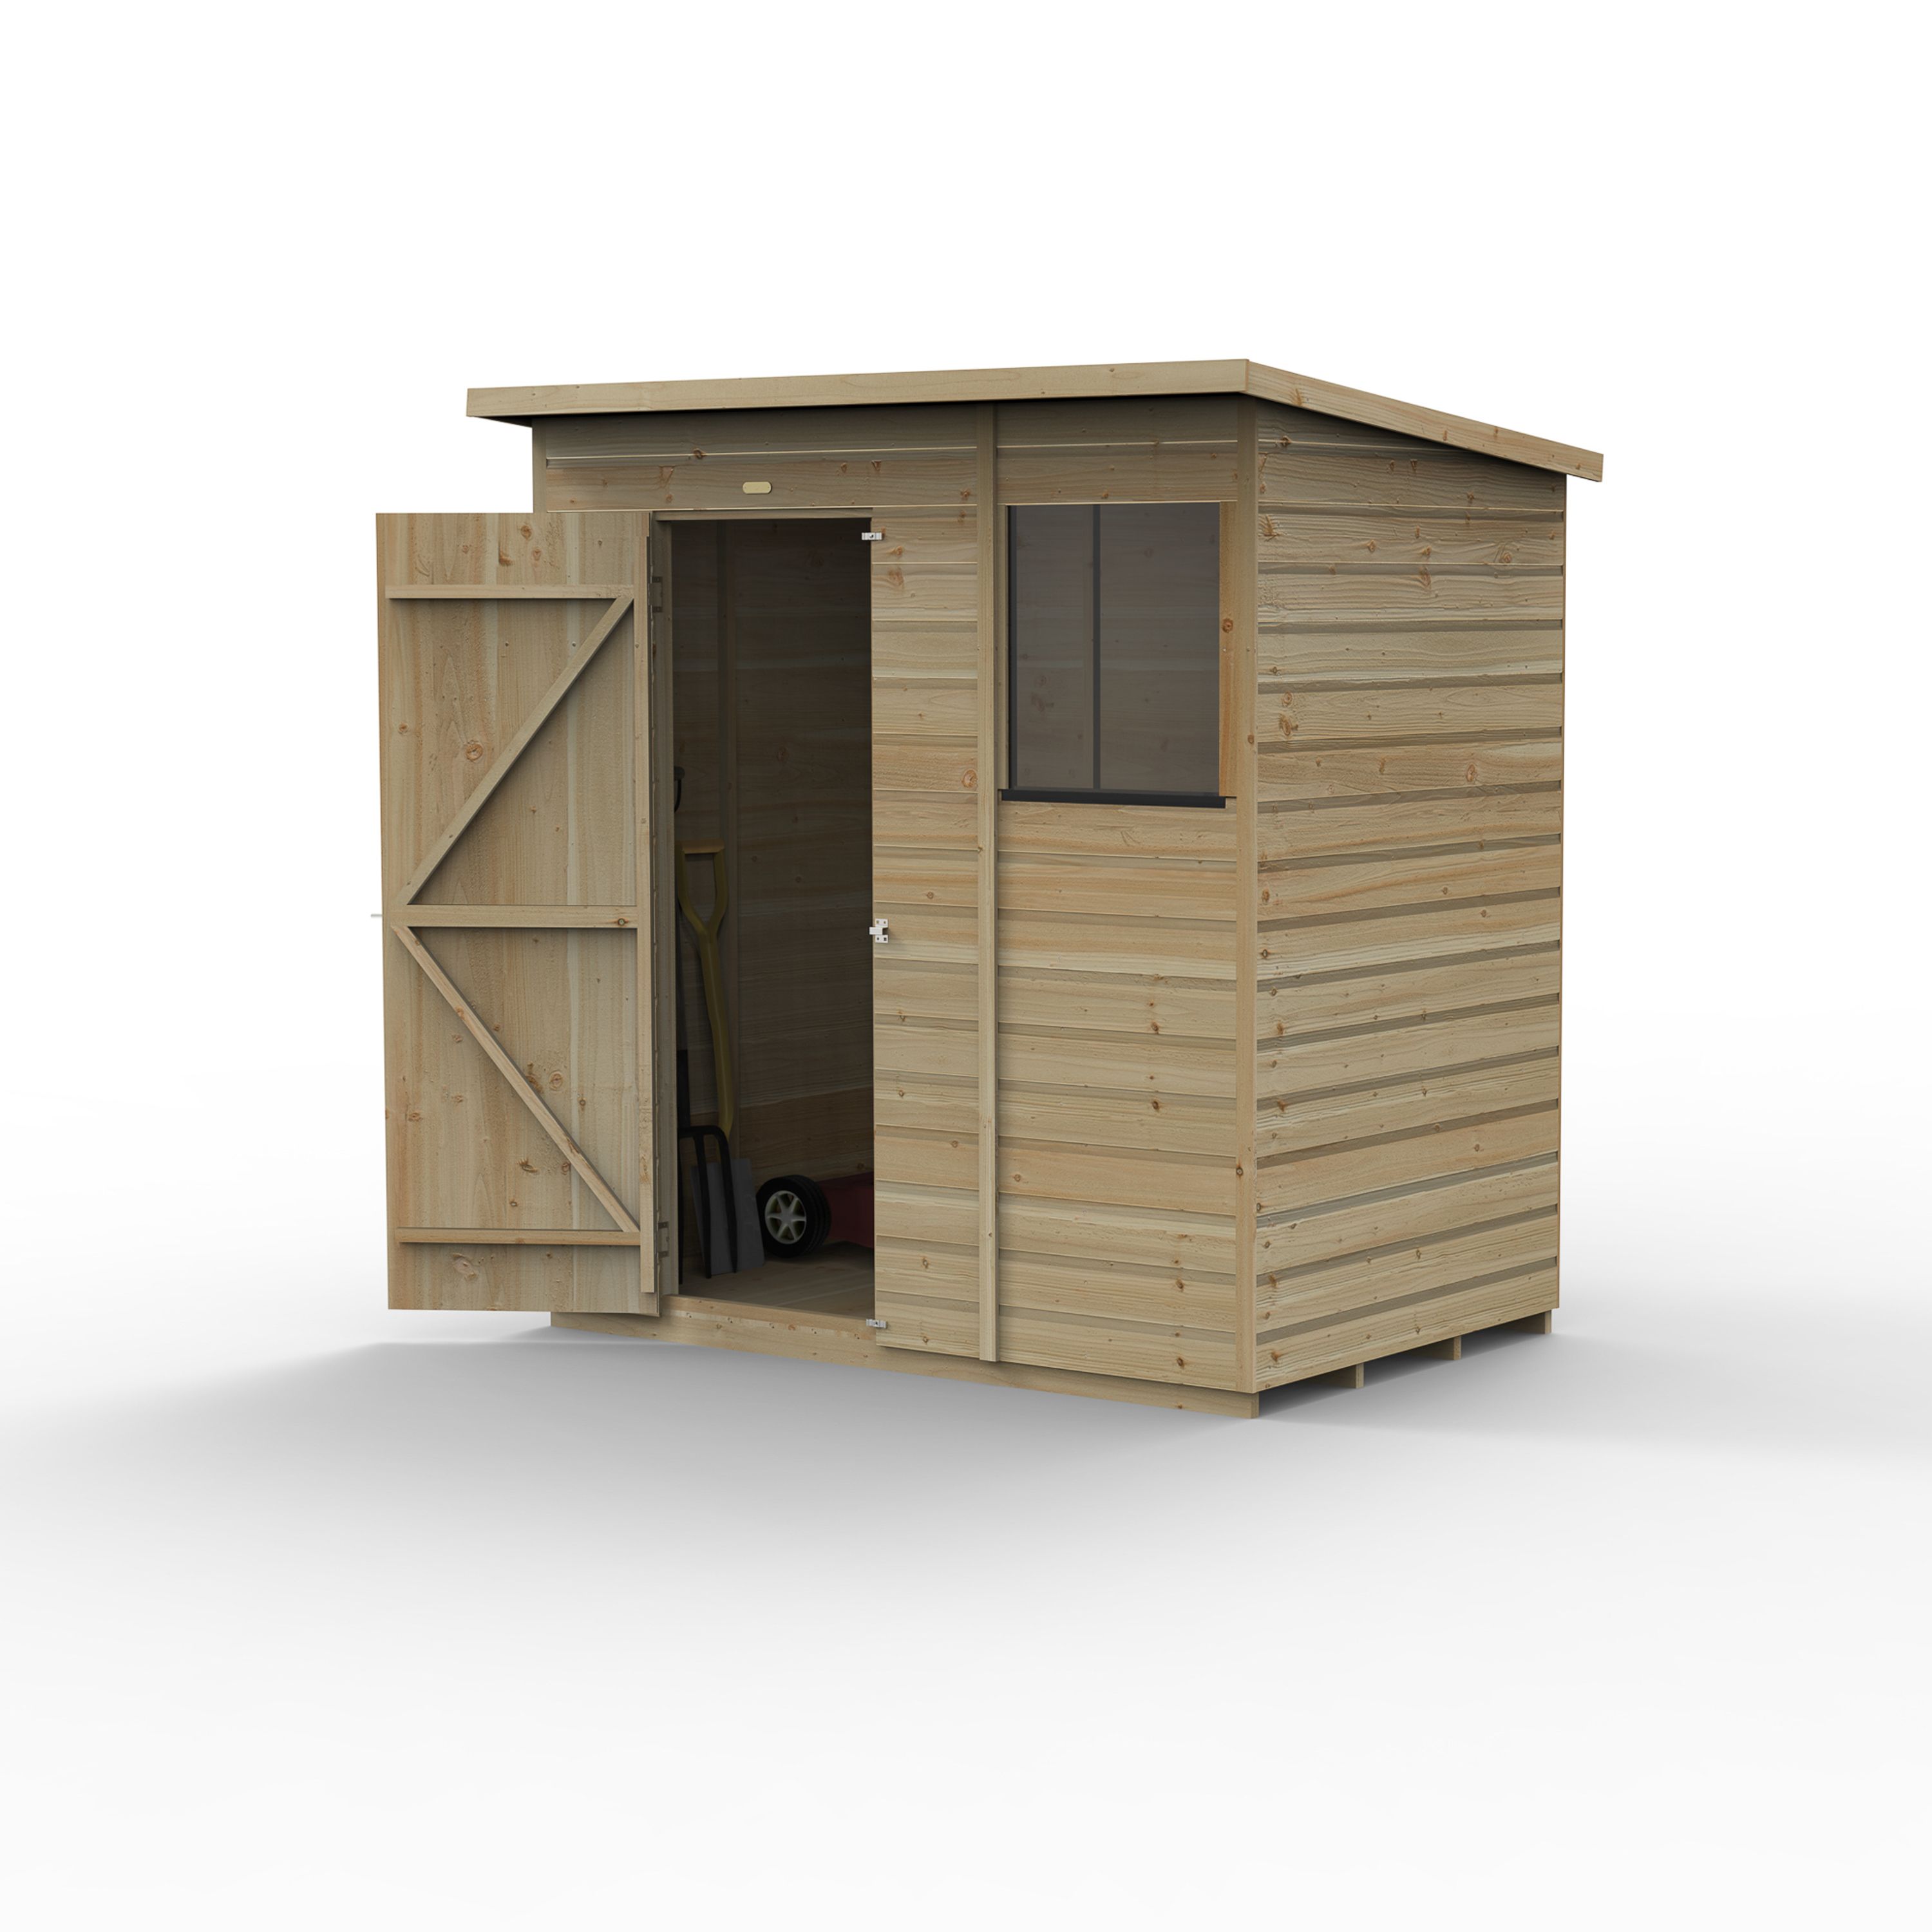 Forest Garden Beckwood 6x4 ft Pent Natural timber Wooden Shed with floor & 1 window (Base included) - Assembly not required